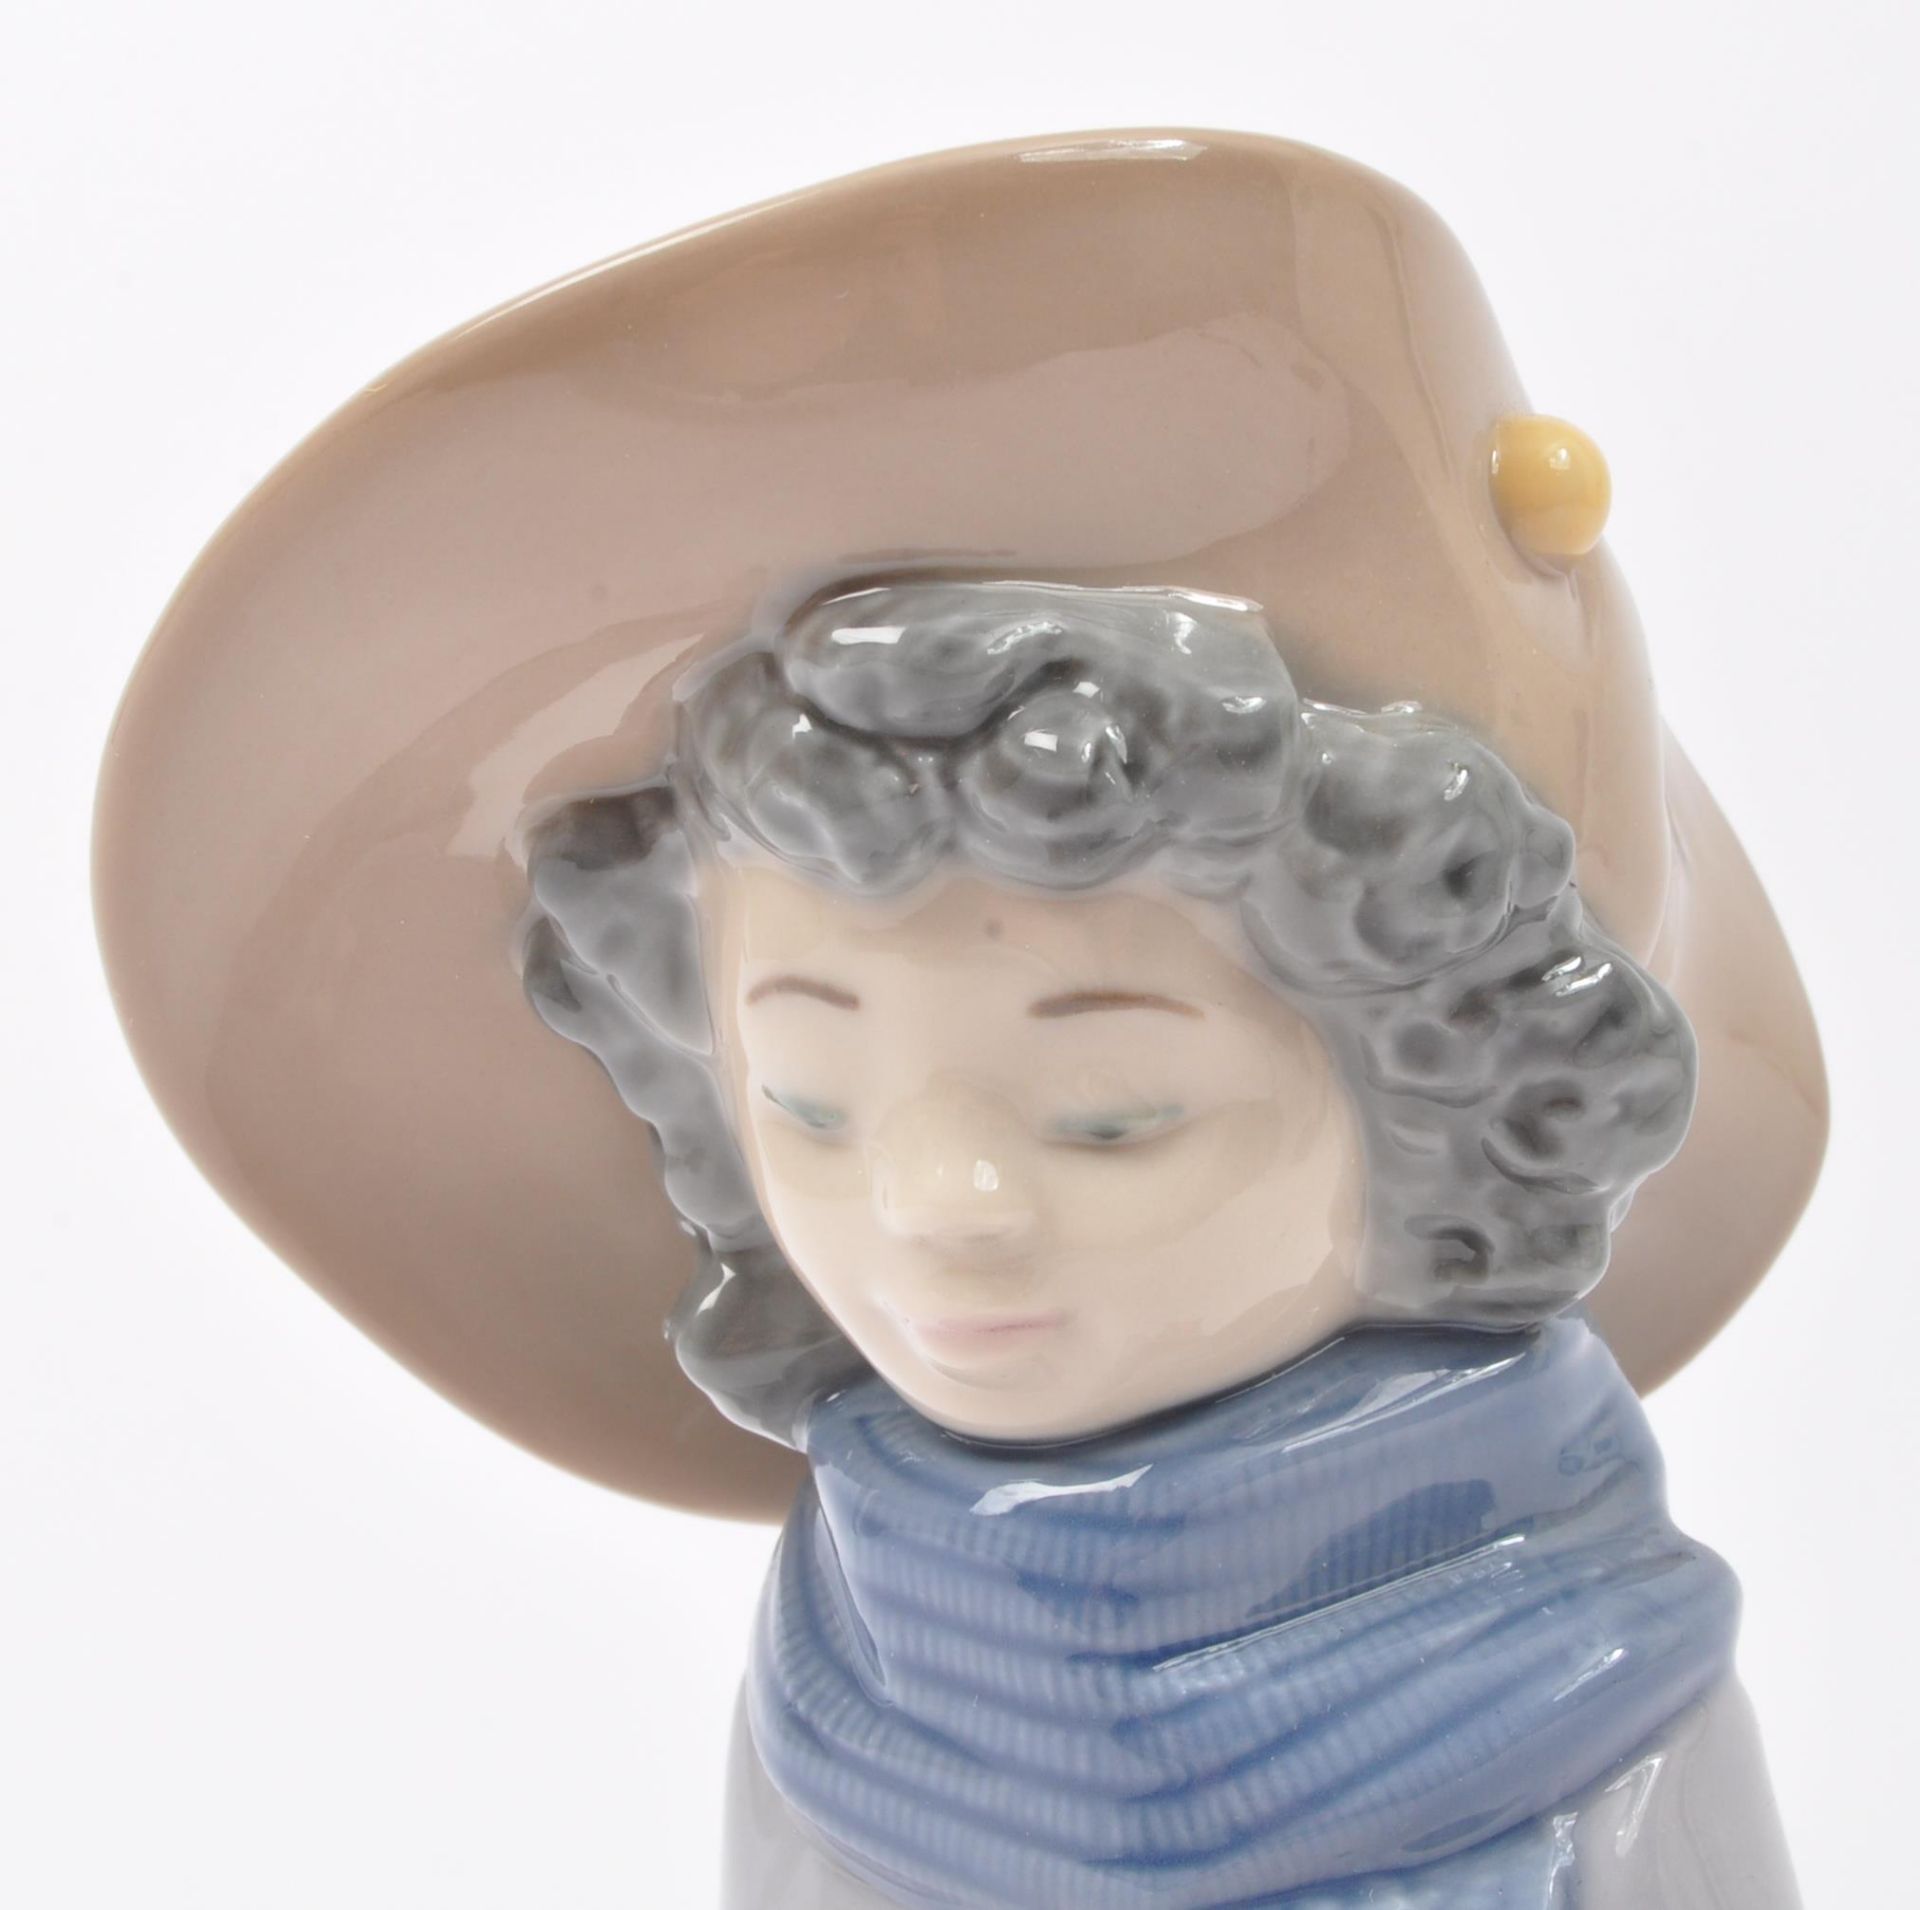 NAO - DON'T WAKE US UP - BOXED CERAMIC FIGURINE - Image 2 of 4